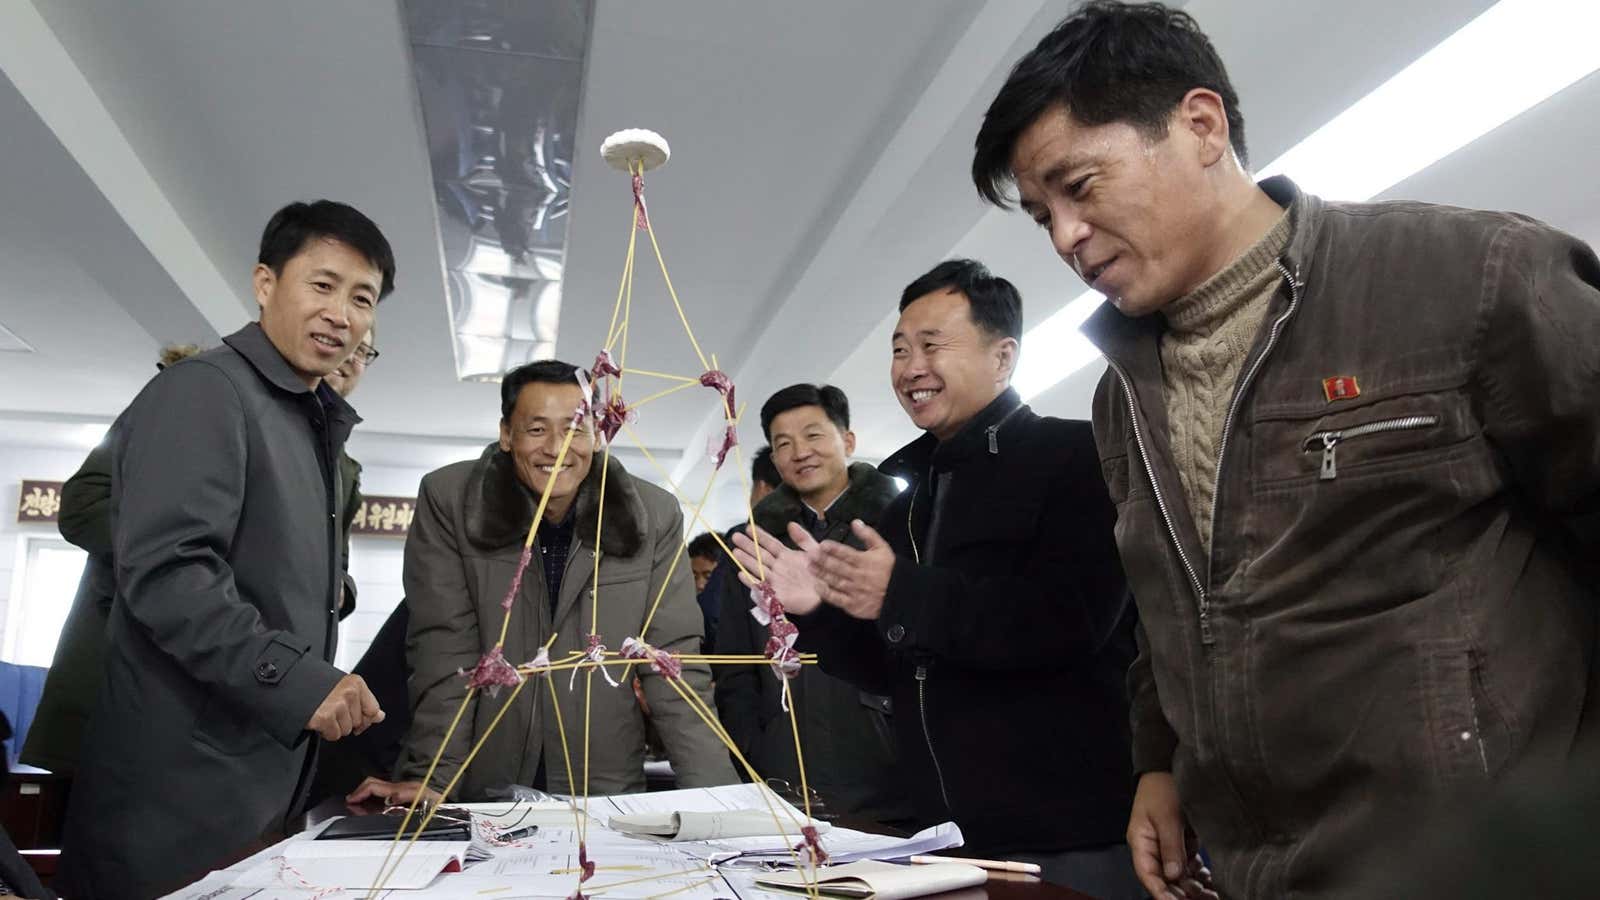 Team building in the DPRK.